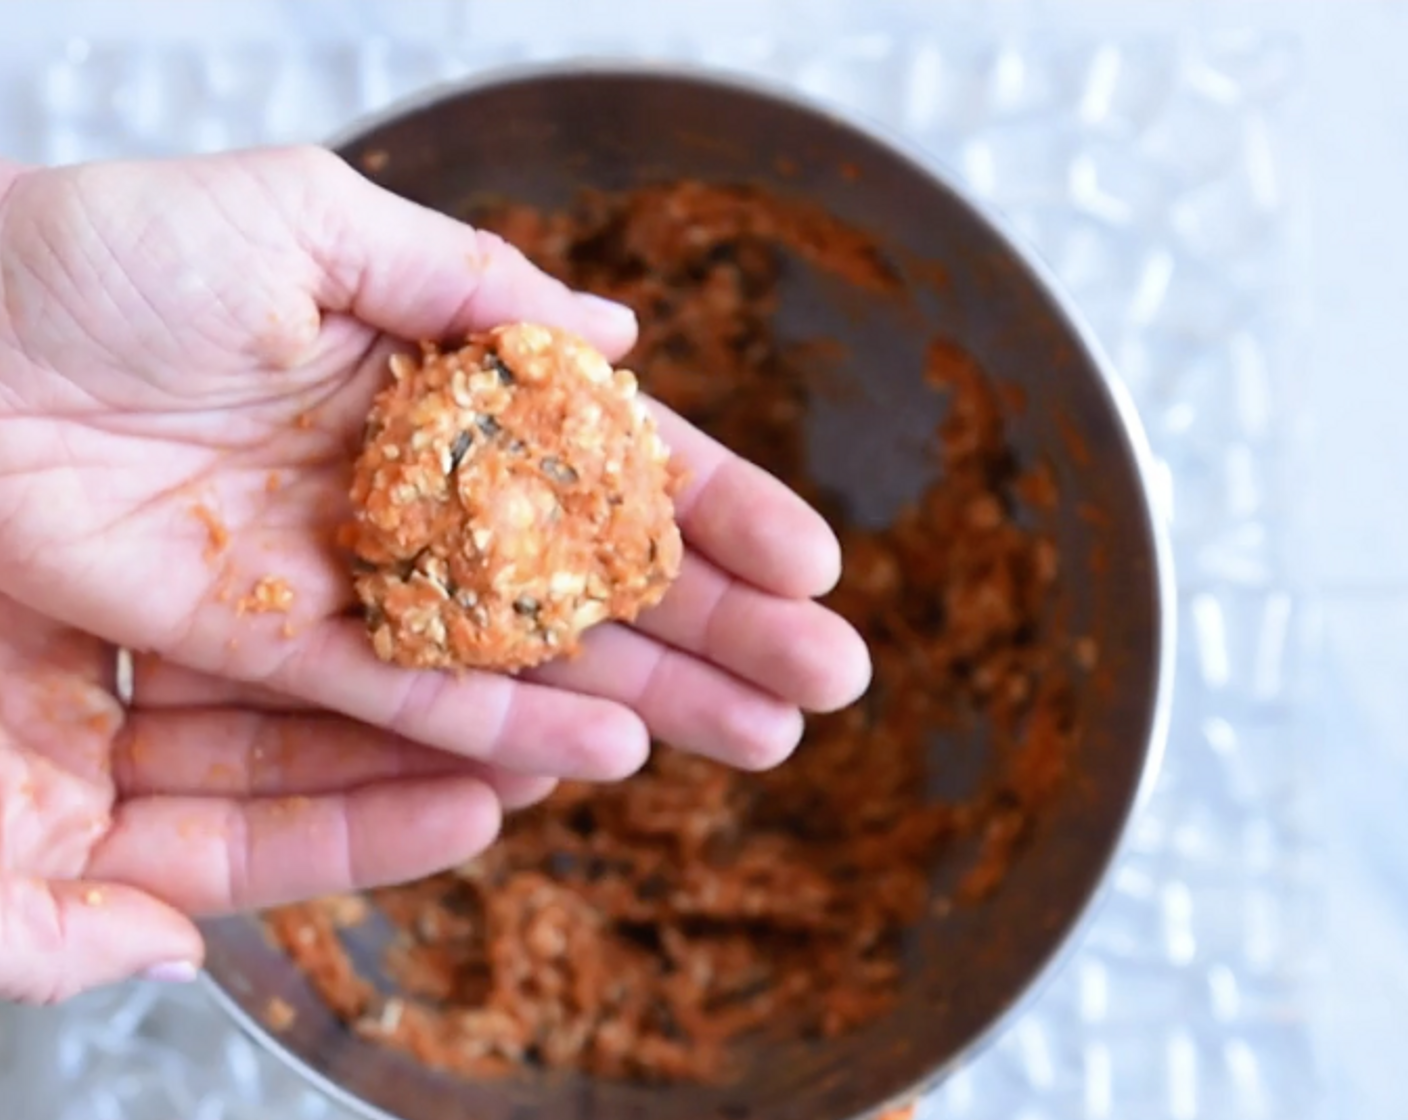 step 4 Using your hands, form burger mixture into balls about the size of a golf ball. Press to flatten into patties and place patties on wax paper until ready to fry.